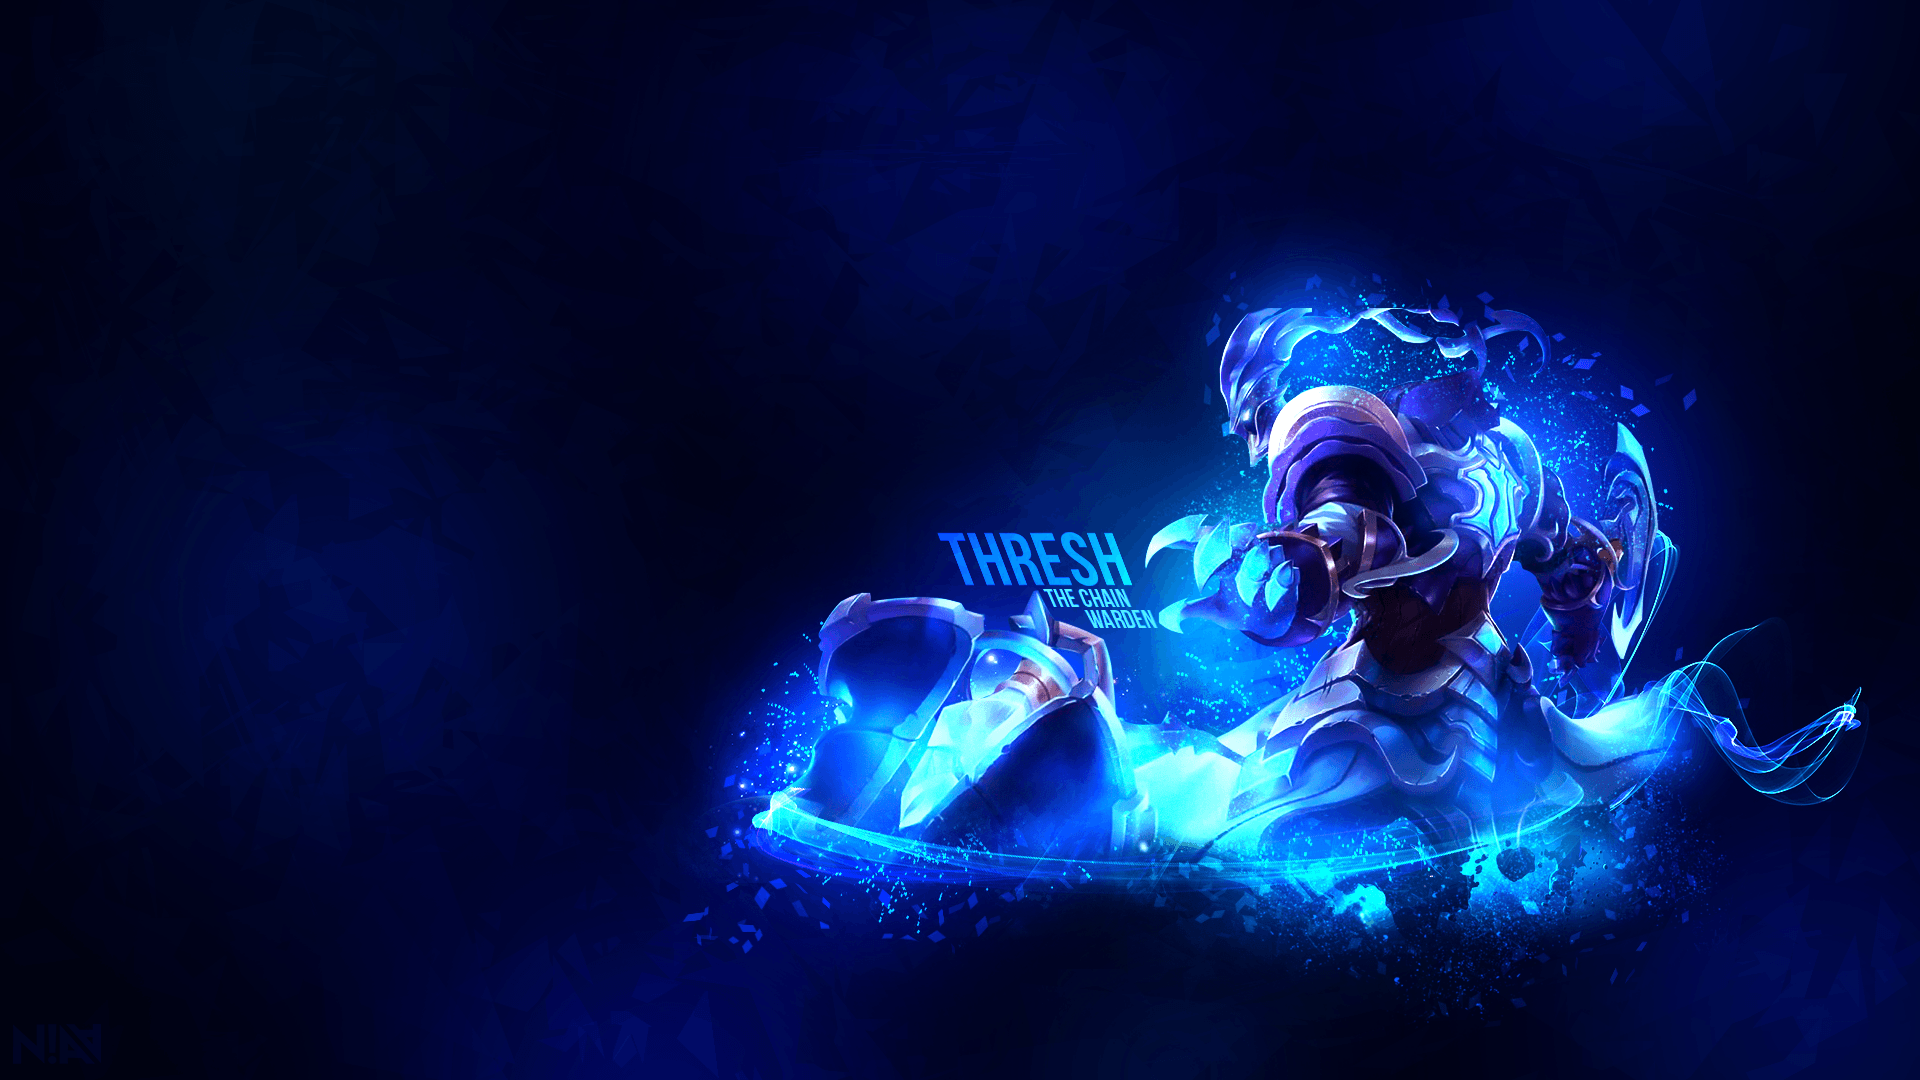 Download League Of Legends Championship Thresh Wallpapers Phone Is.